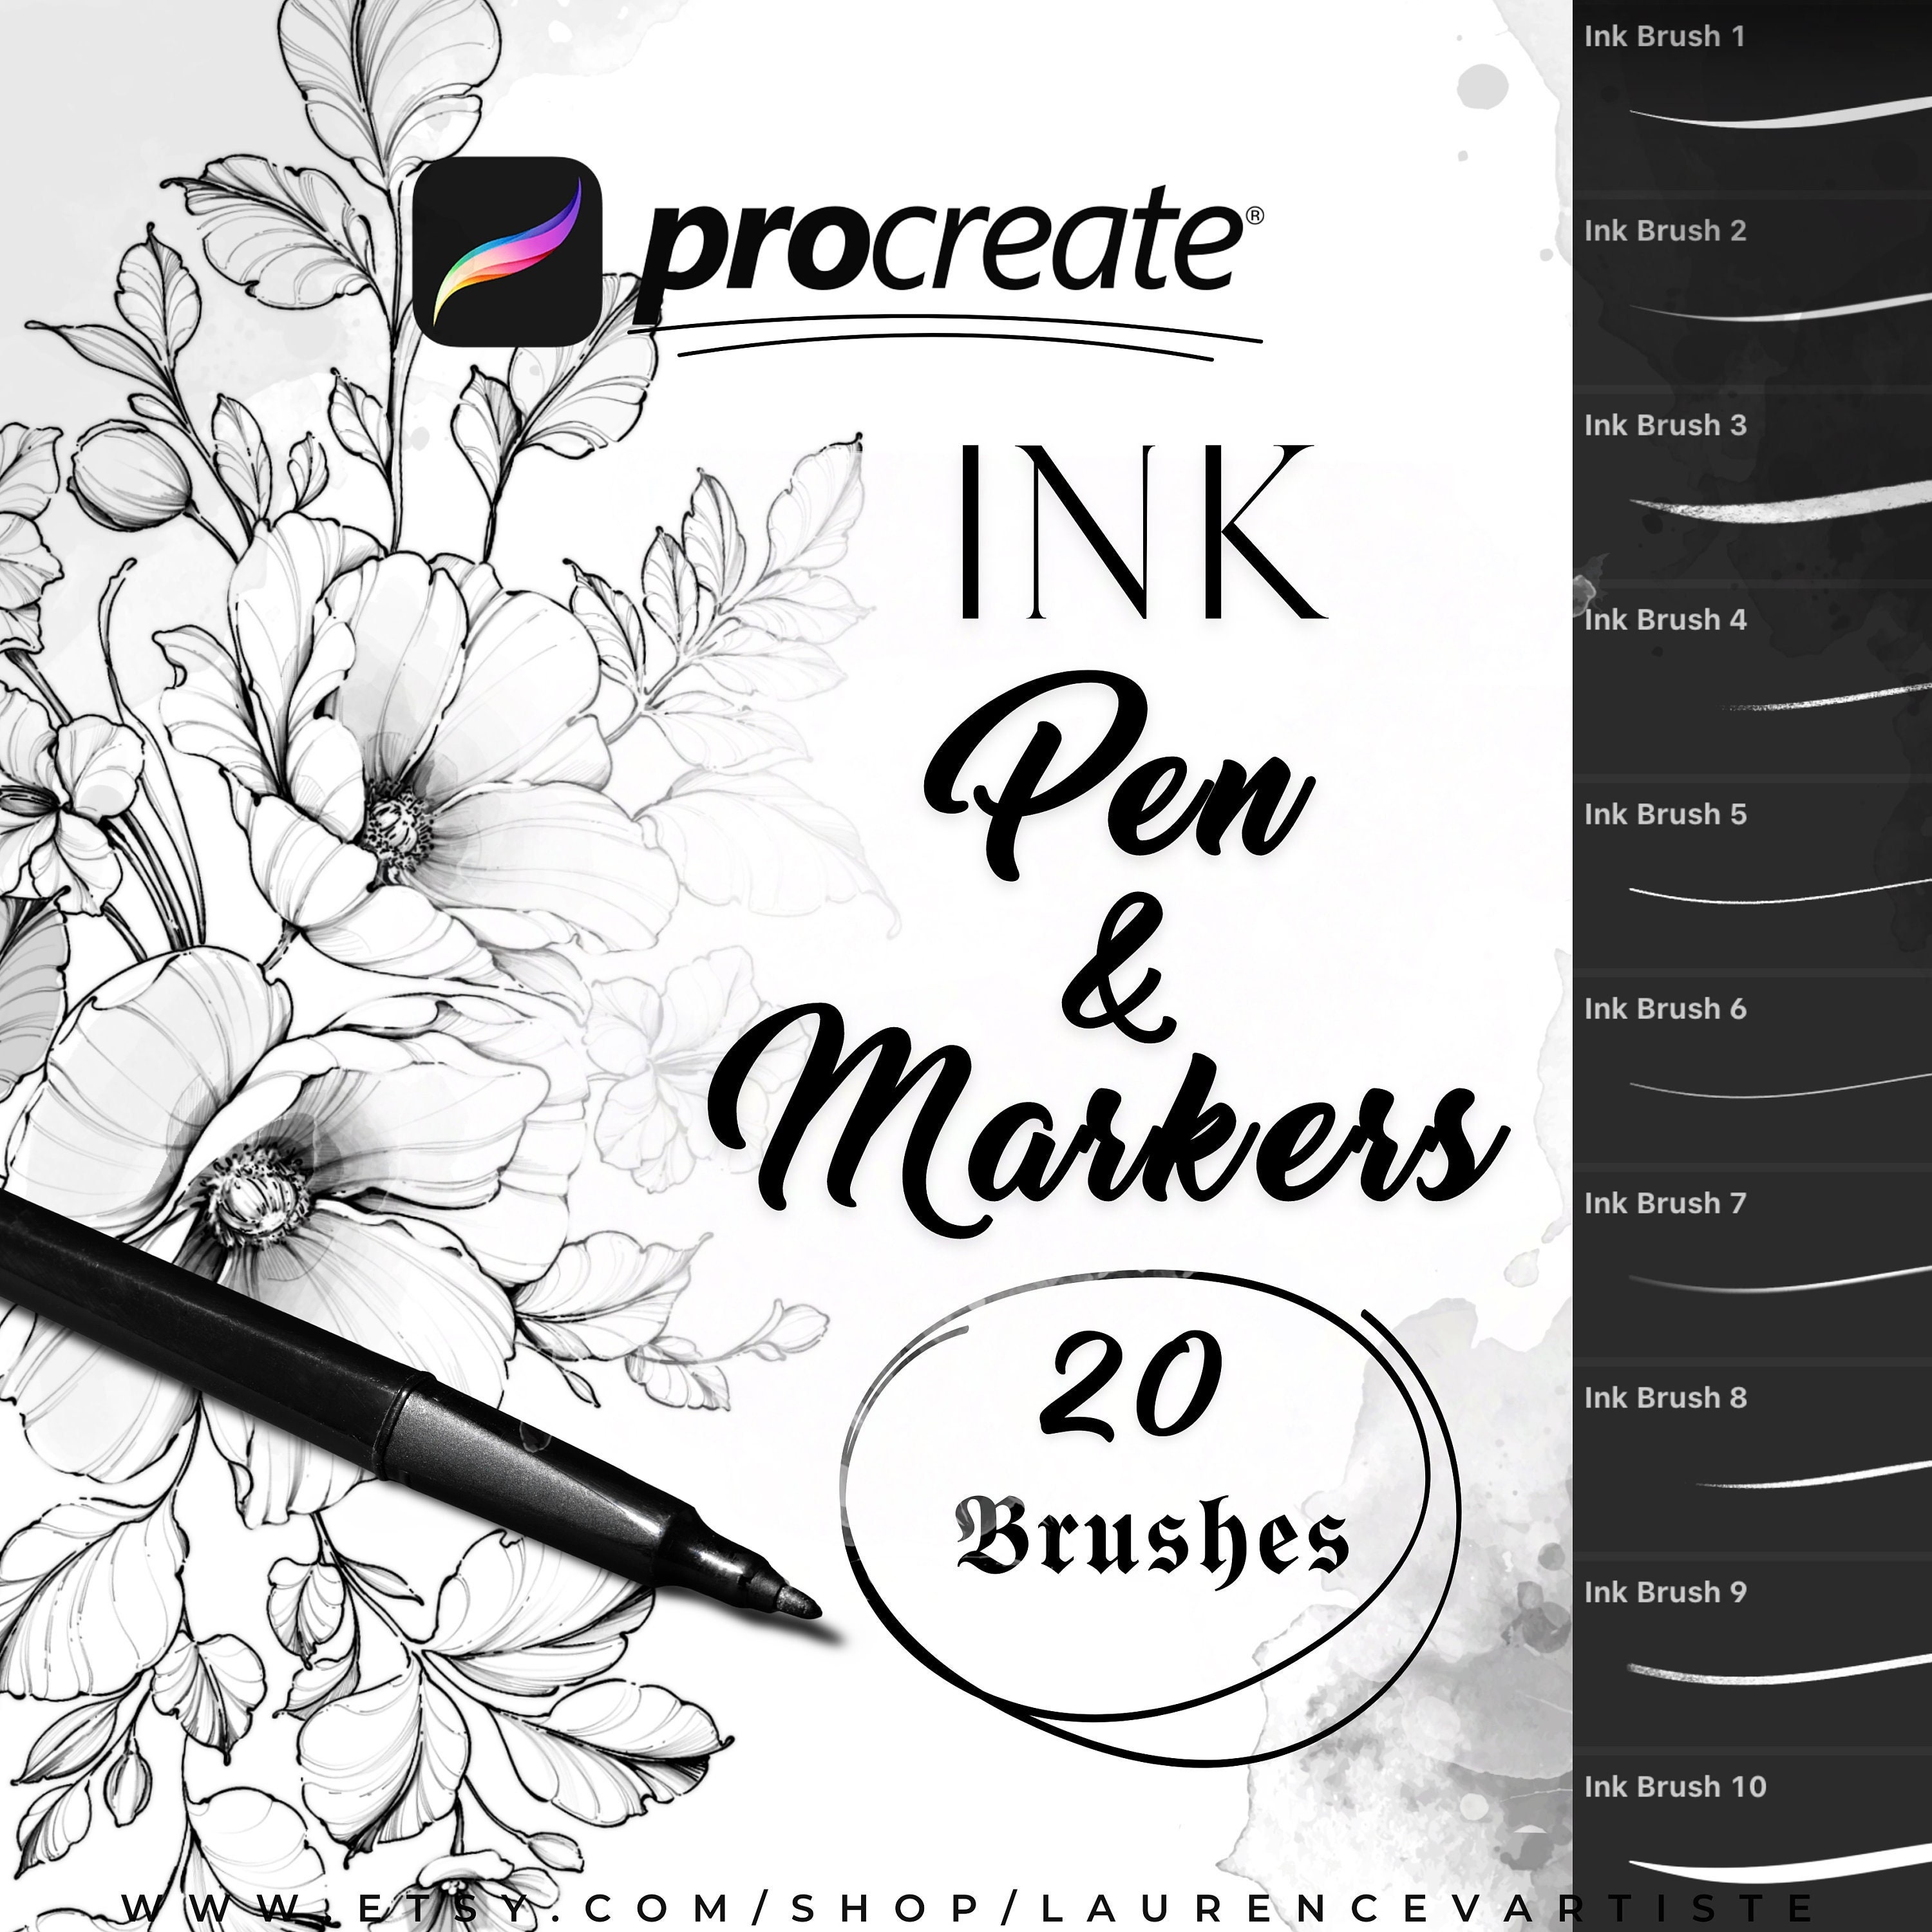 Floral Drawing Coloring Single Line Drawing Infusible Ink Pen and Marker  SVG Mug Wrap Template for Use With Cricut Mug Press Flowers 